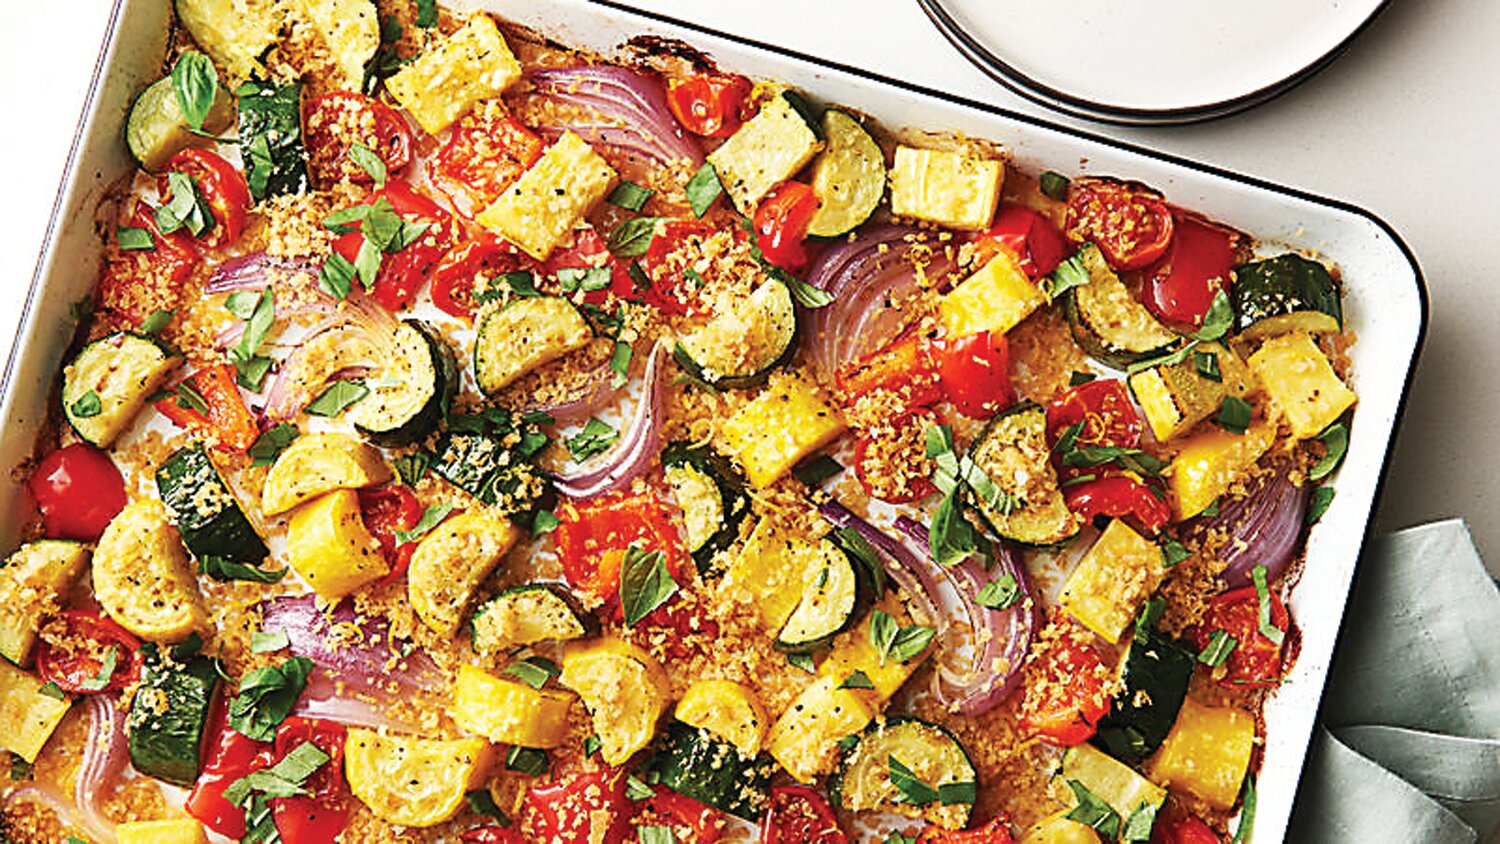 One idea for how to prepare the bounty of summer vegetables now in season is roasting them in a sheet pan like this one.